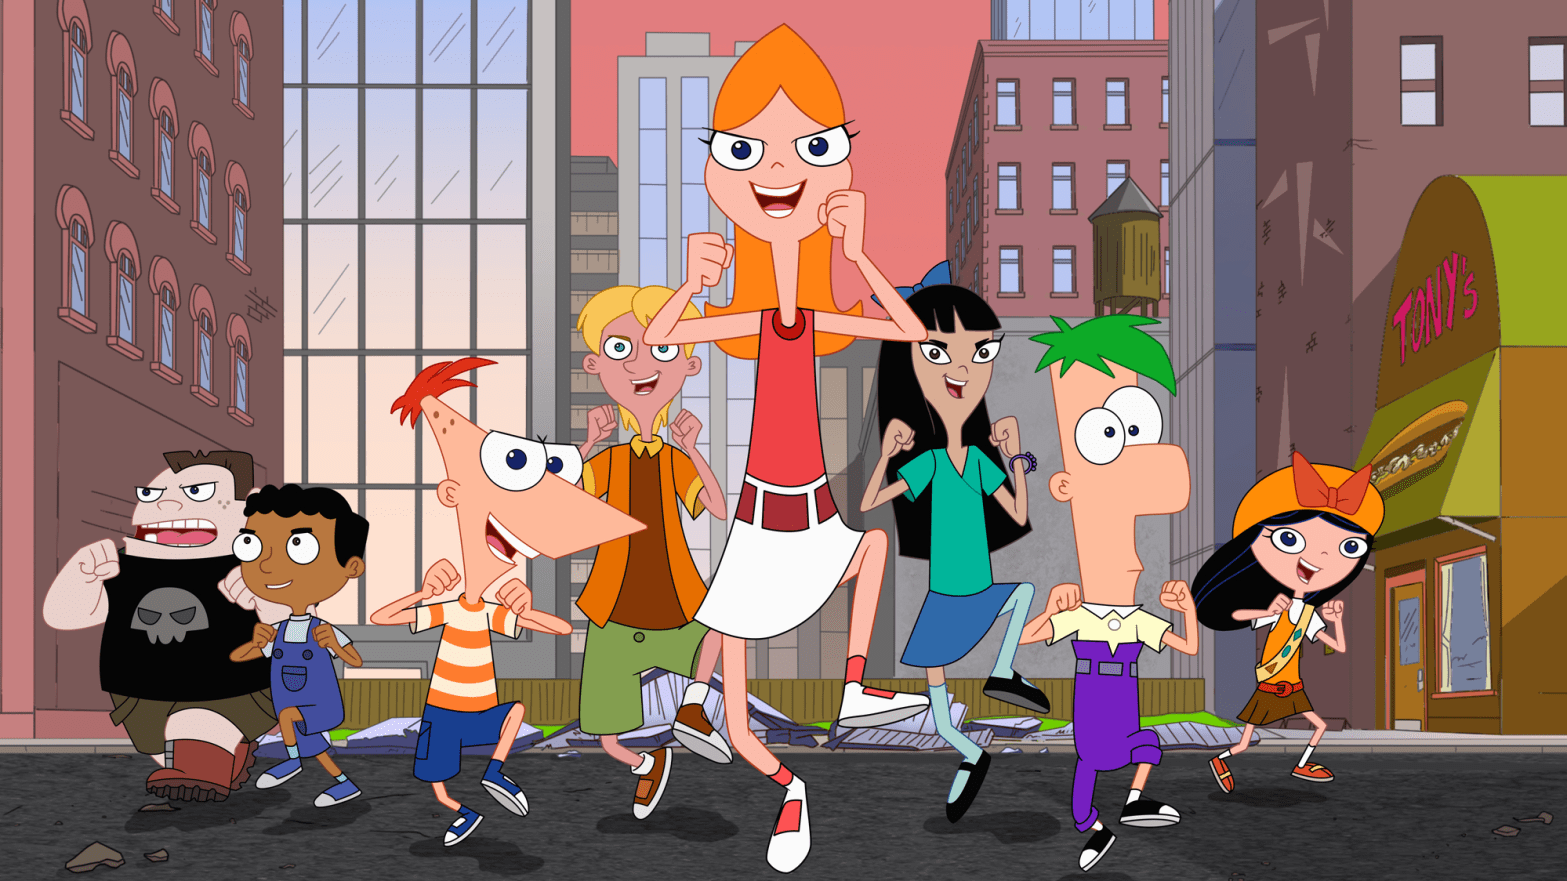 Candace leads the Phineas and Ferb crew.  (Image: Disney)